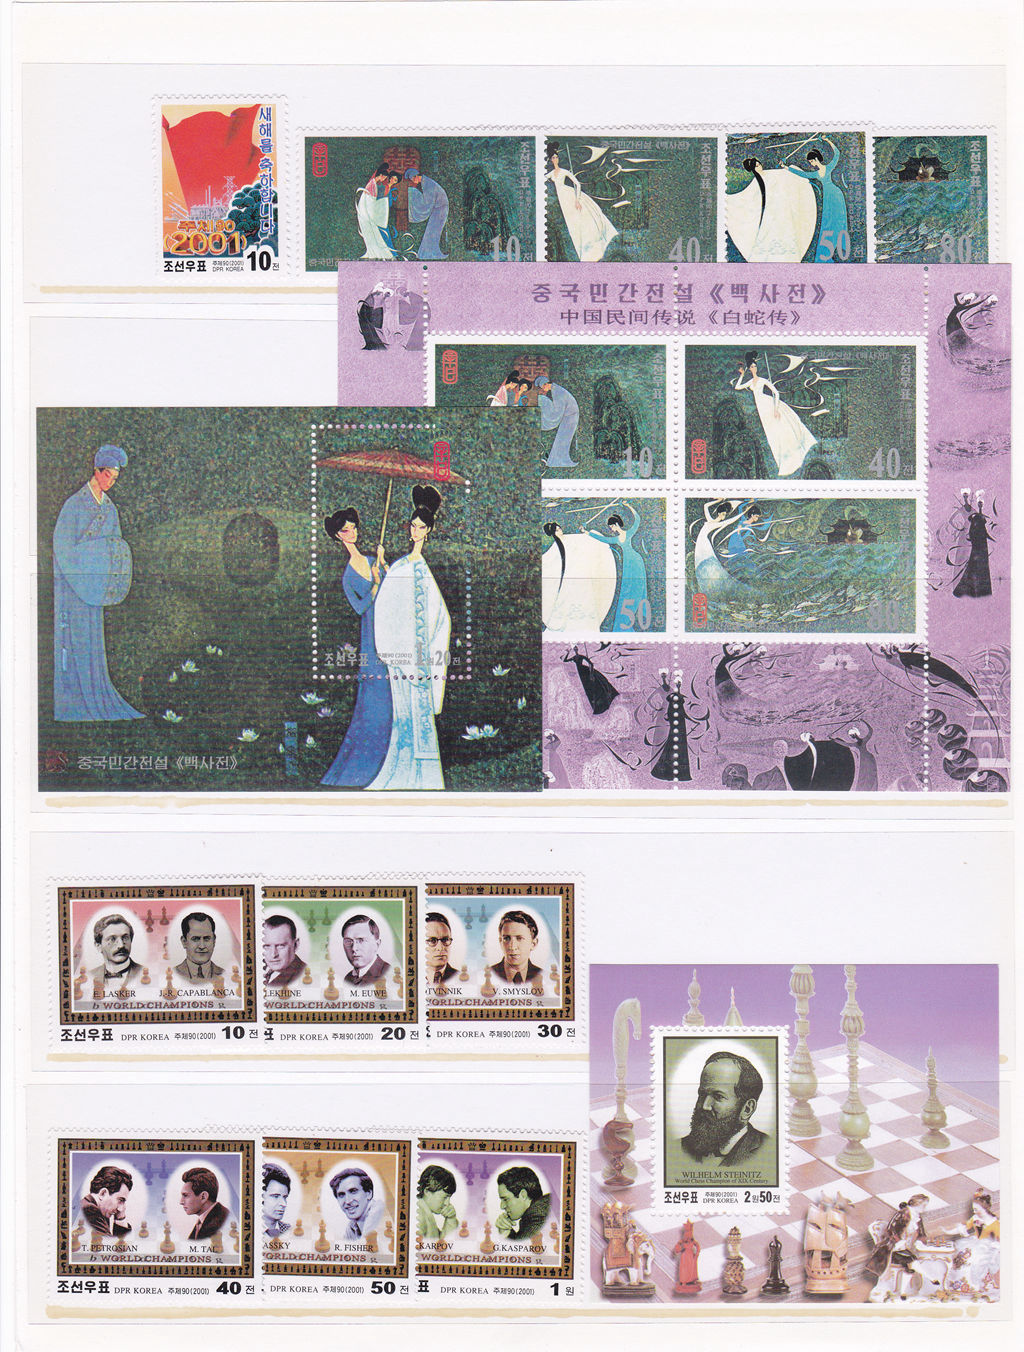 L4038, Korea 2001 Year Stamps (42 pcs Stamps and 23 pcs SS/MS), MNH